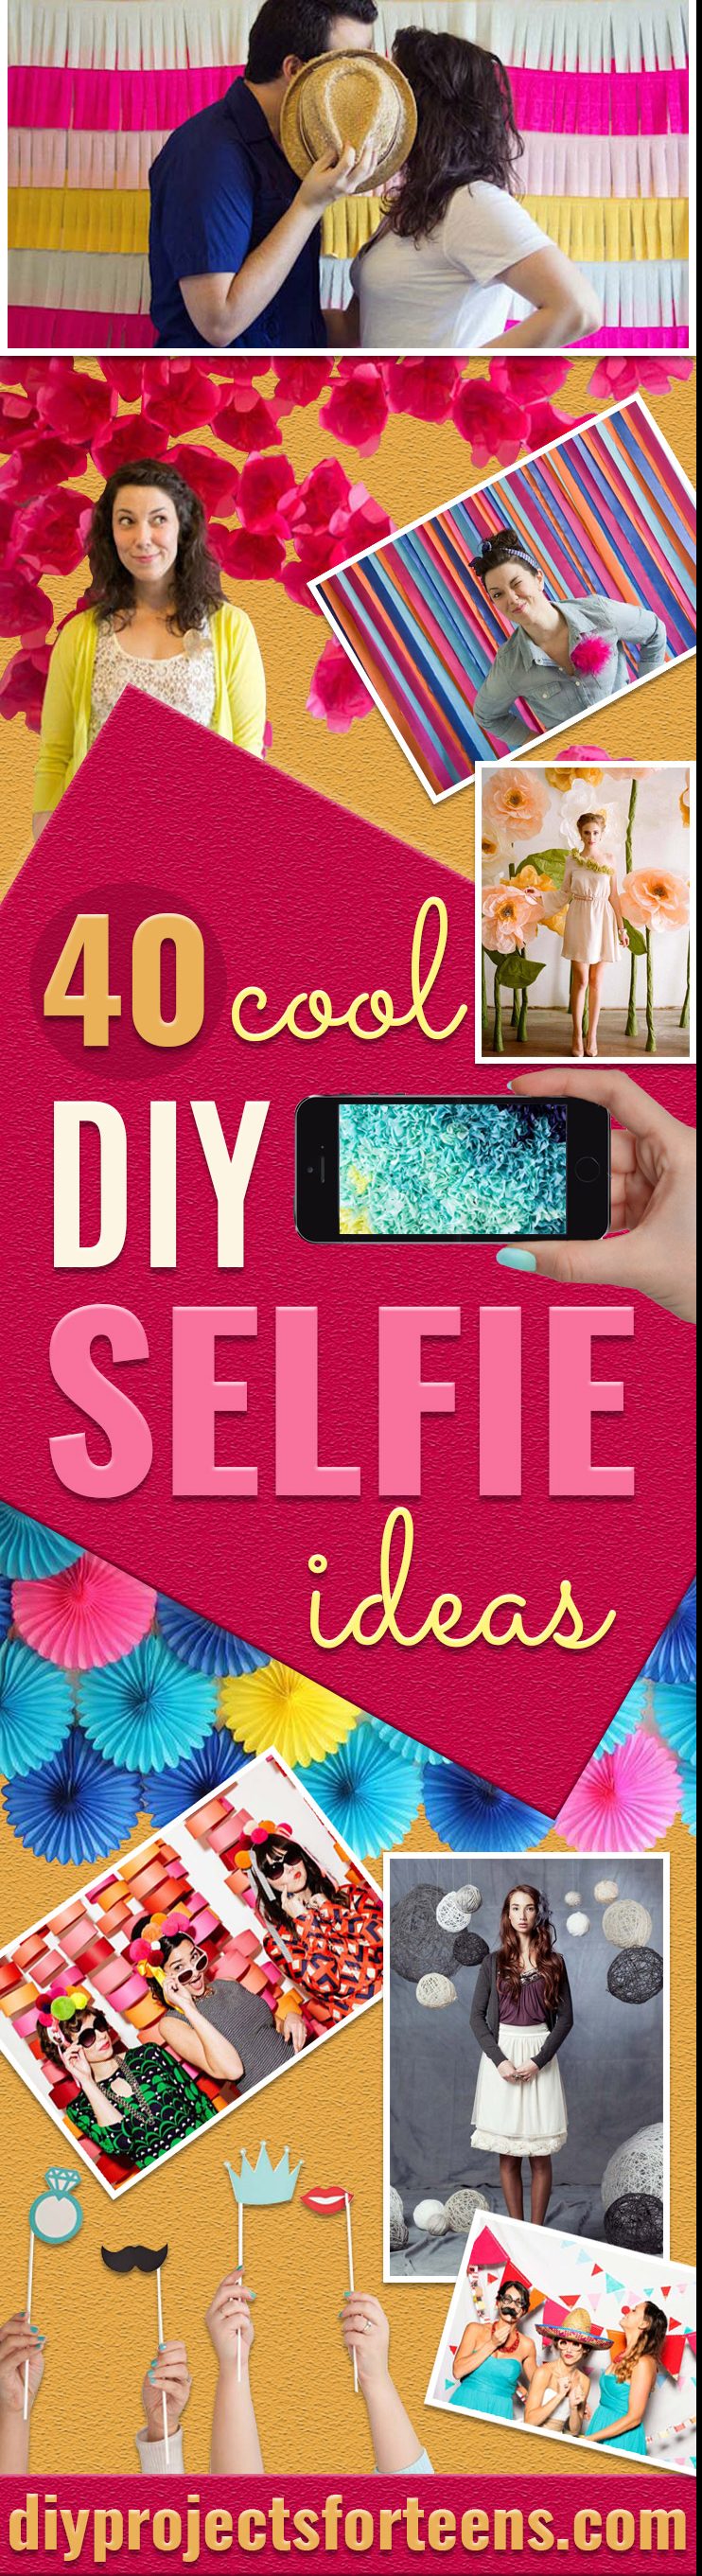 DIY Selfie Ideas - Cool Ideas for Photo Booth and Picture Station - Props, Light, Mirror, Board, Wall, Background and Tips for Shooting Best Selfies - DIY Projects and Crafts for Teens 